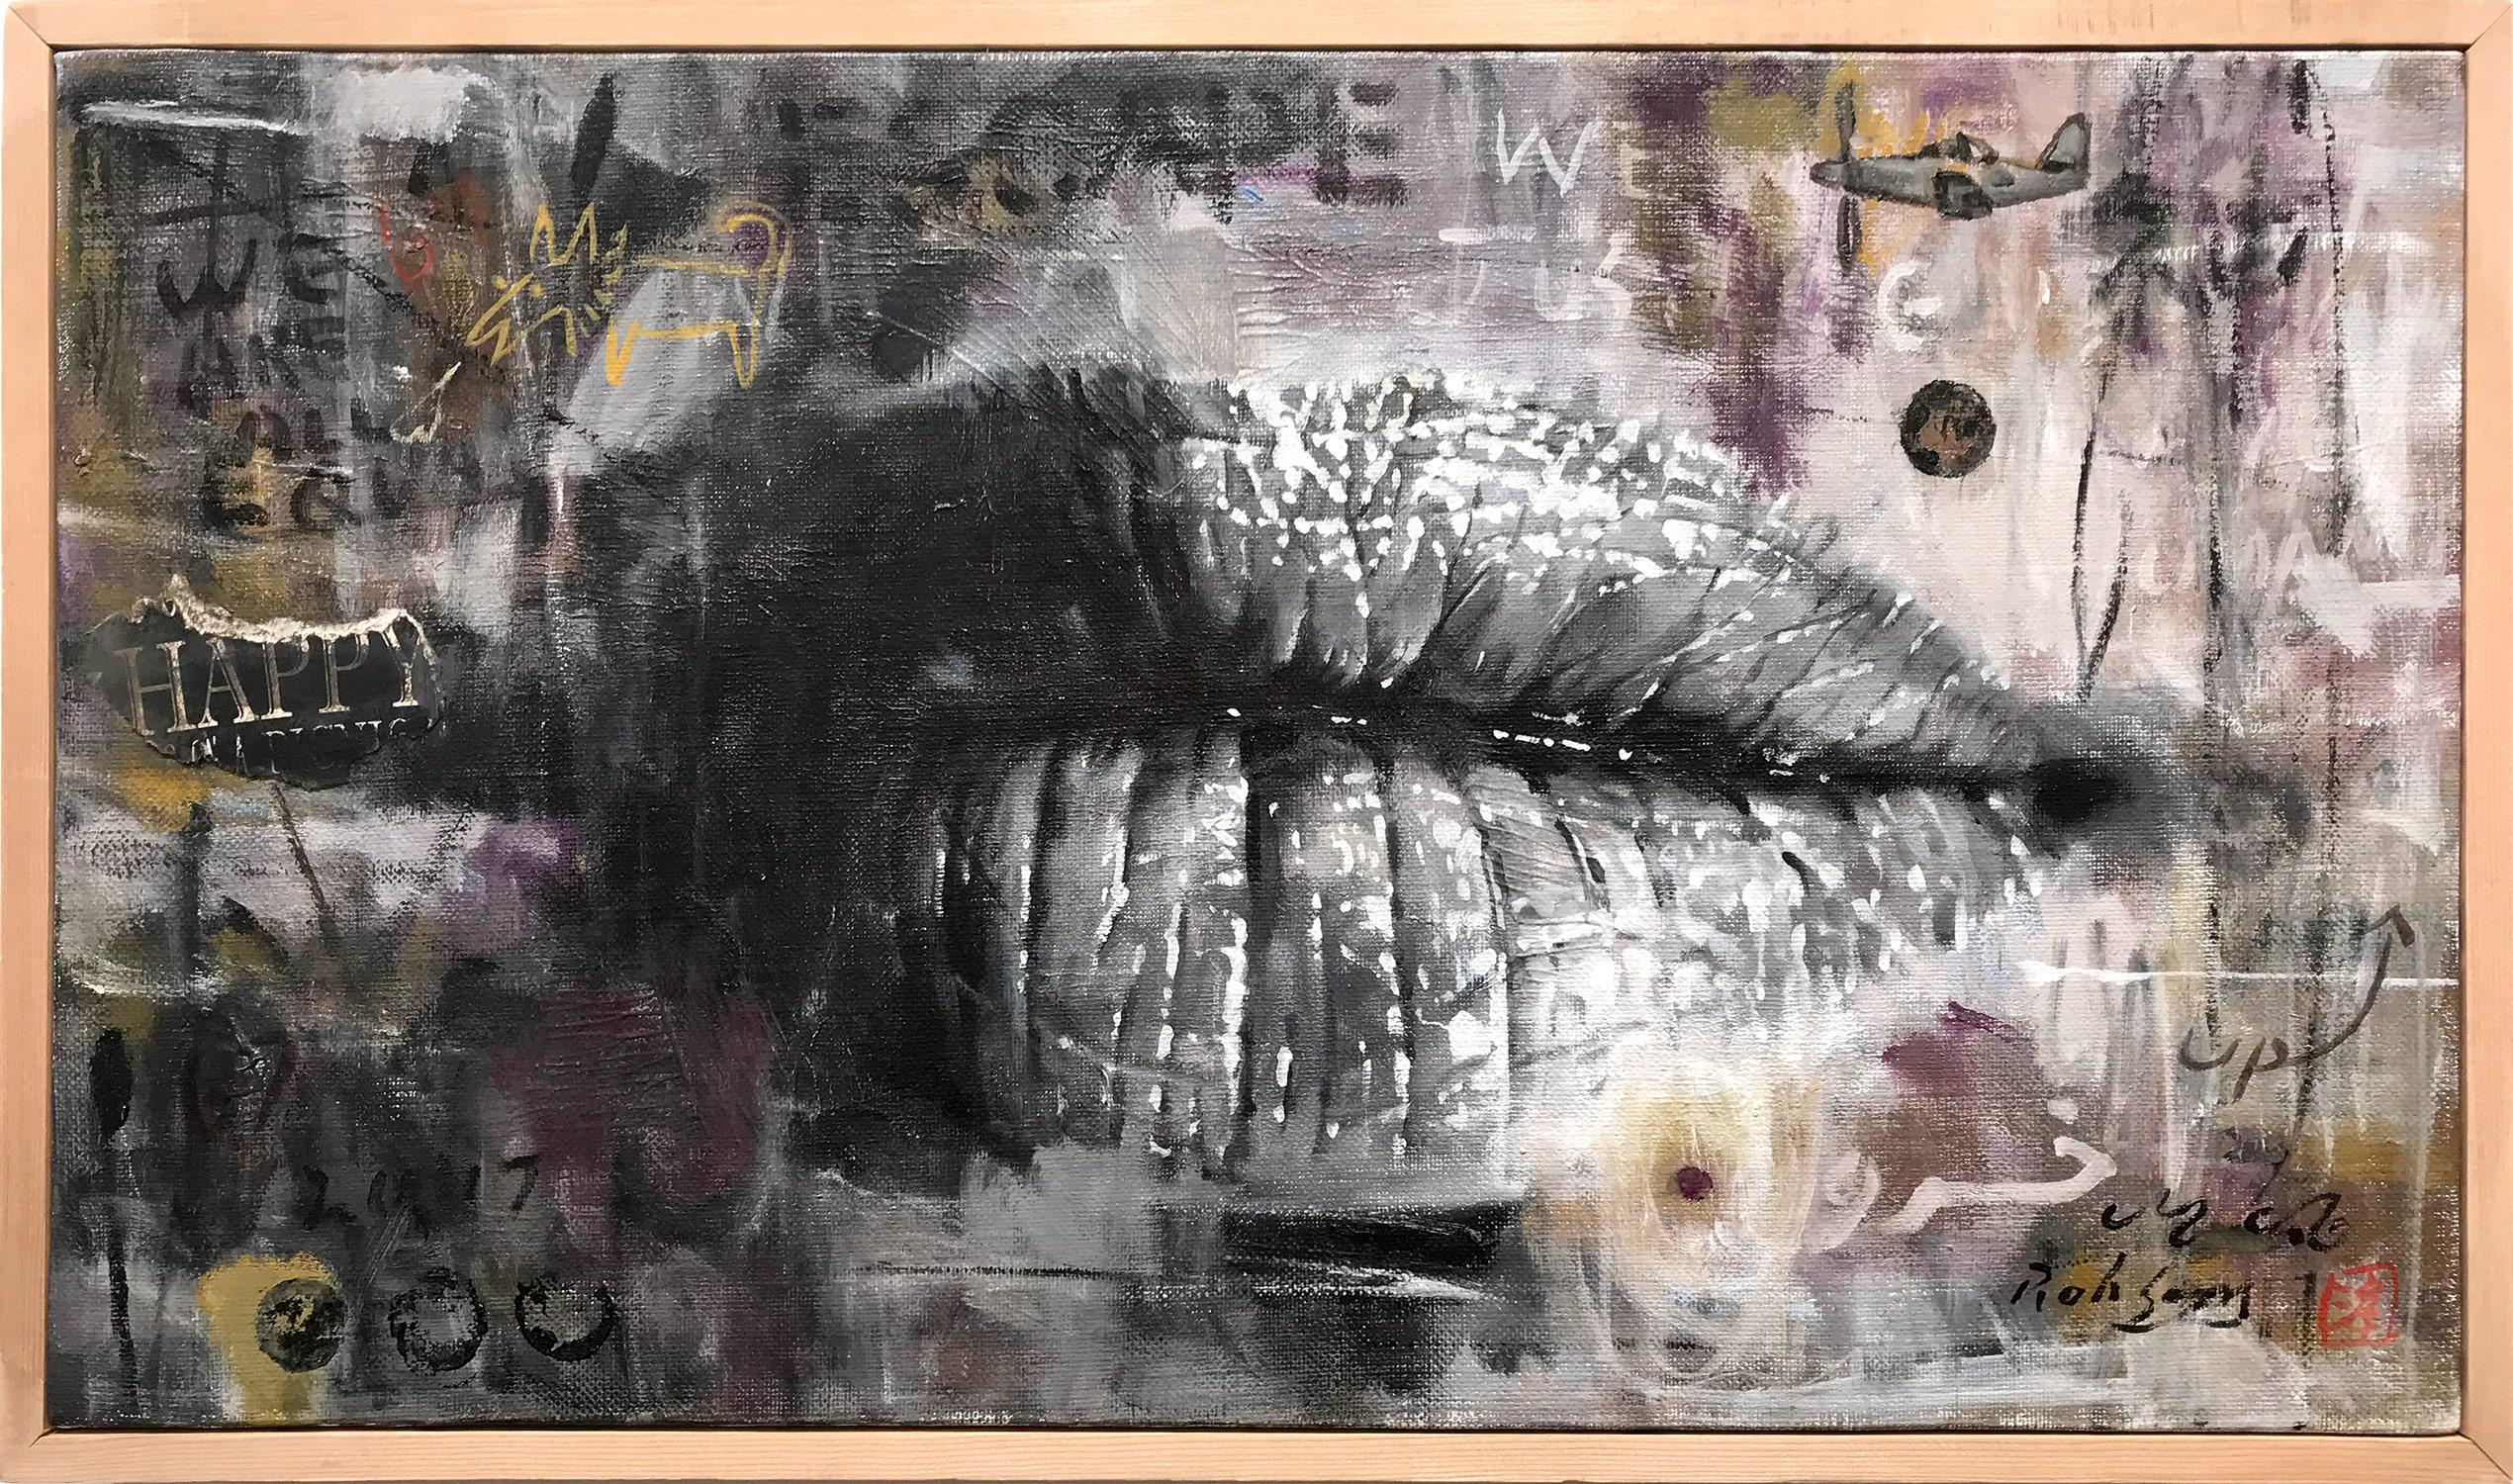 Roh Jae-soon Abstract Painting - "Sound 0096" Contemporary Urban Abstract Oil Painting of Photorealistic Lips